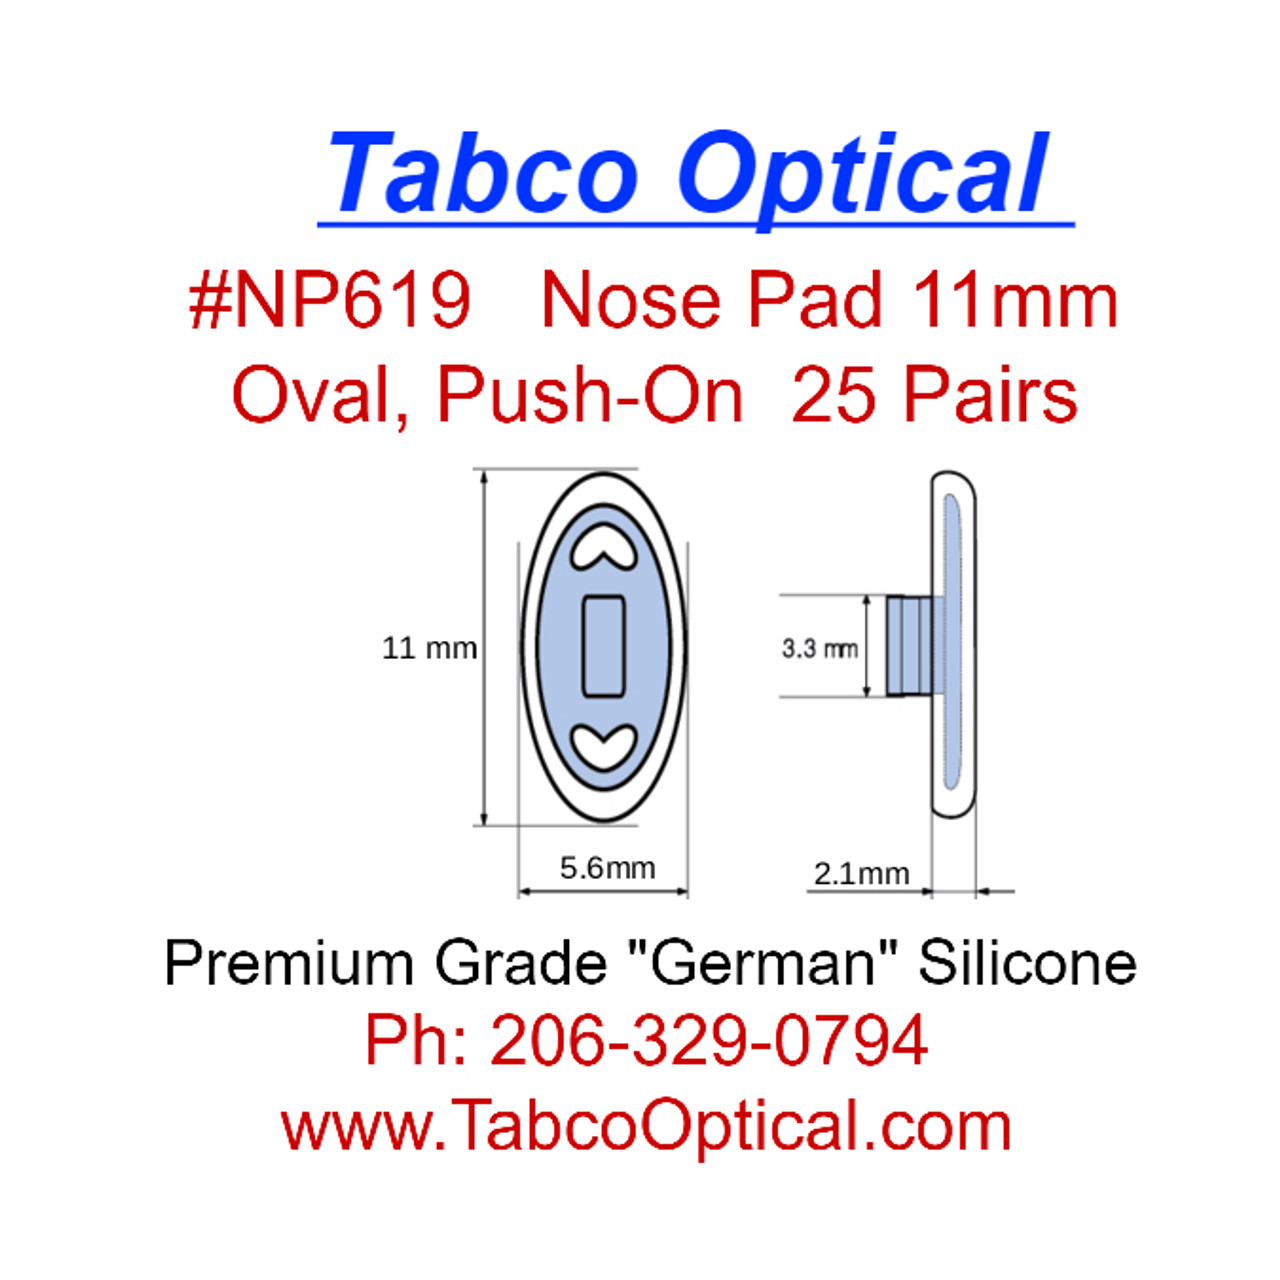 Oval Nose Pads